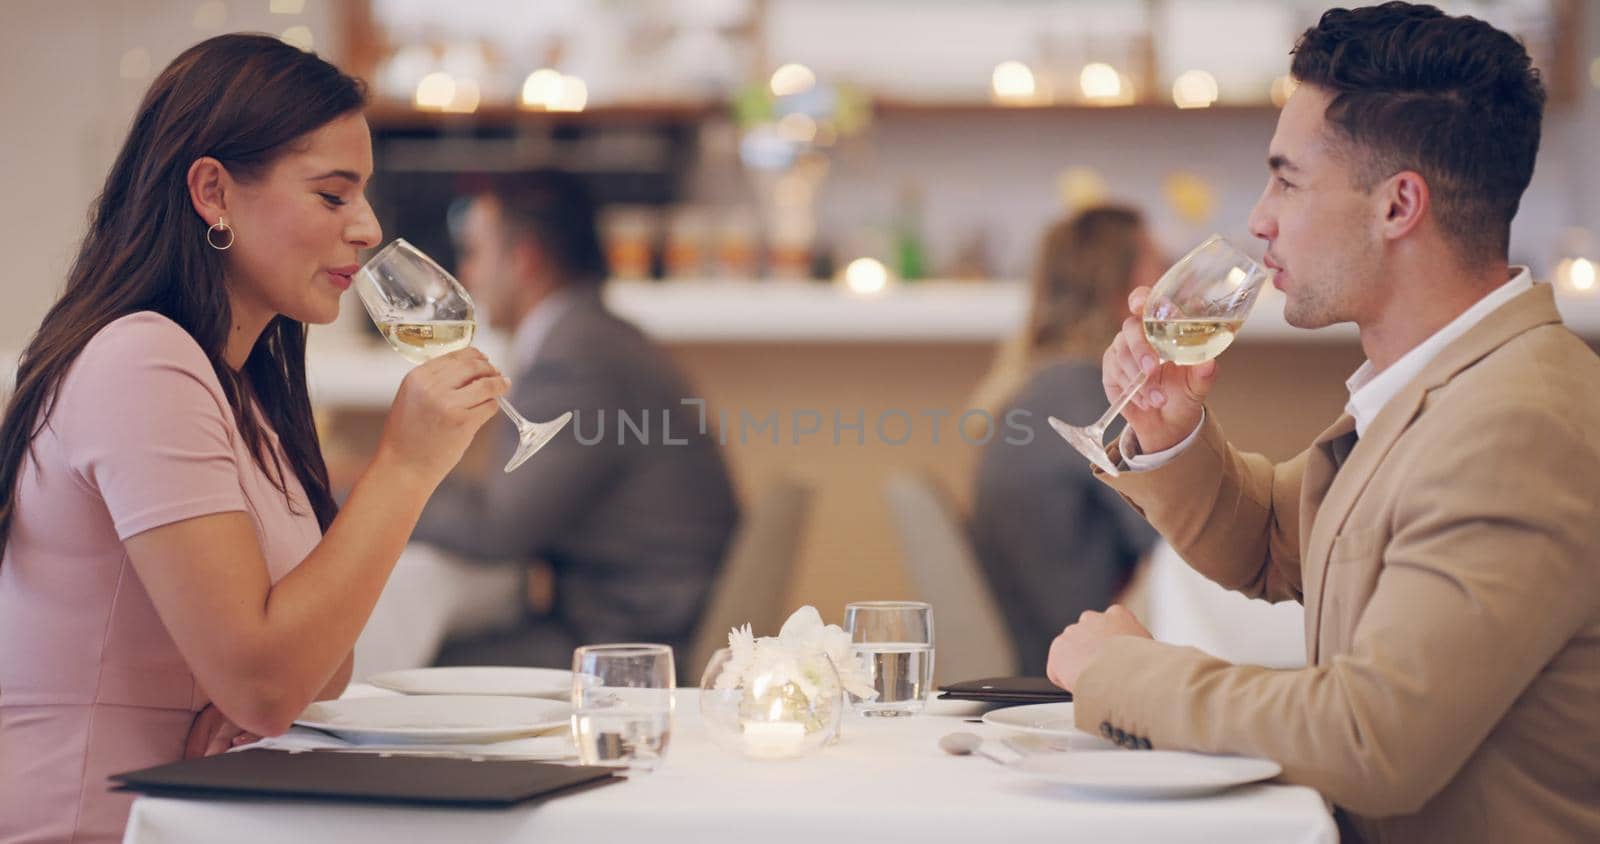 The wine here is really good. 4k video footage of a couple making a toast while on a date at a restaurant. by YuriArcurs